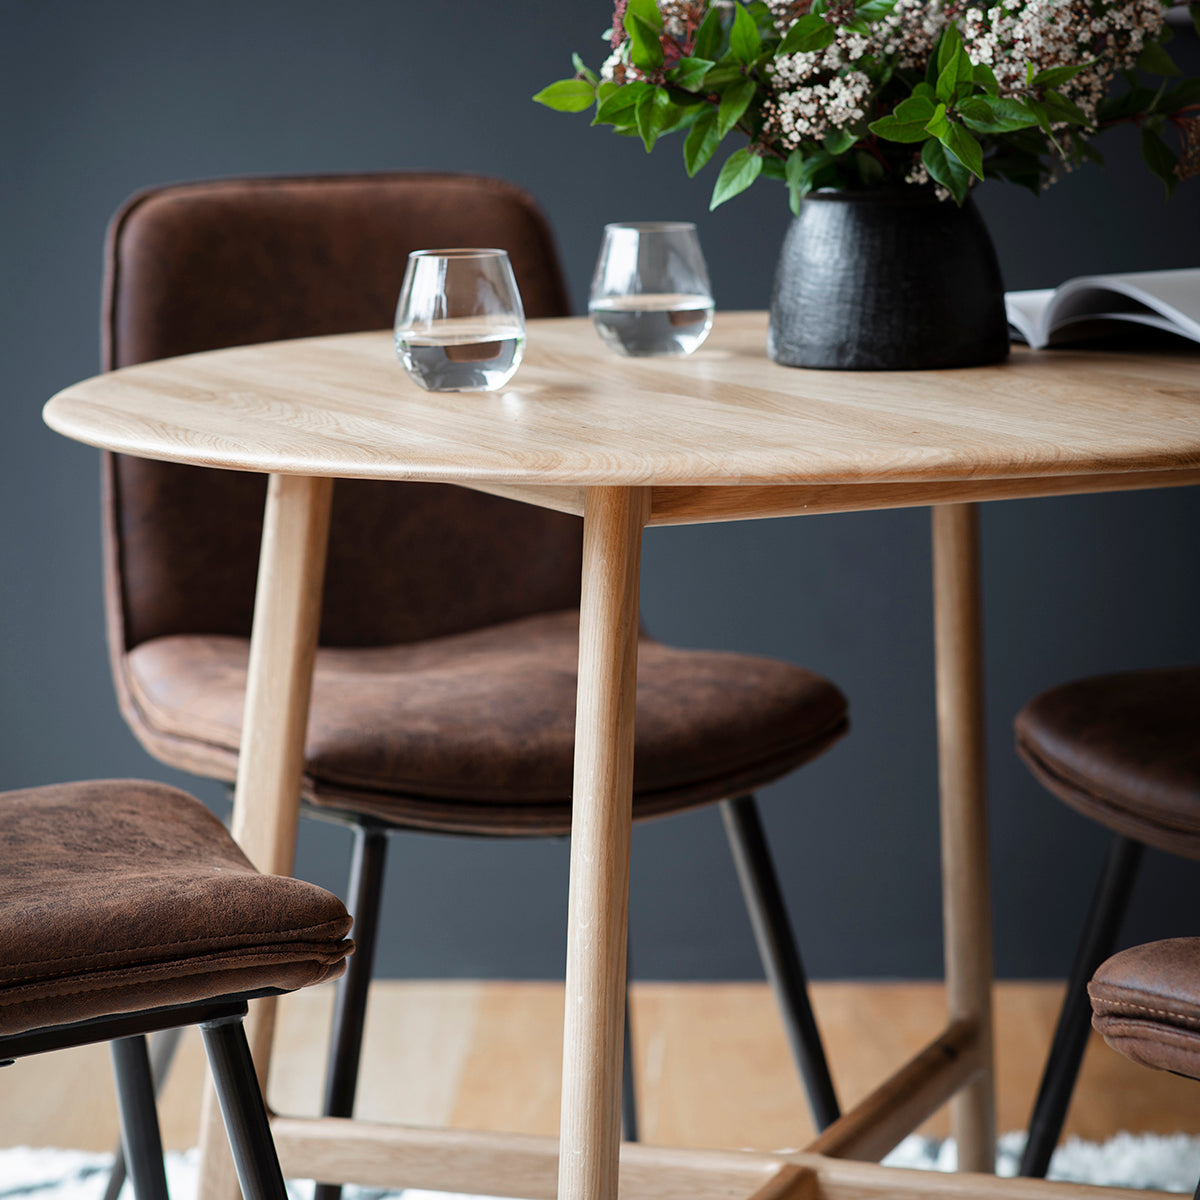 Load image into Gallery viewer, An interior decor essential, the Dairy Round Dining Table 1000x1000x750mm from Kikiathome.co.uk comes complete with four chairs and a vase.
